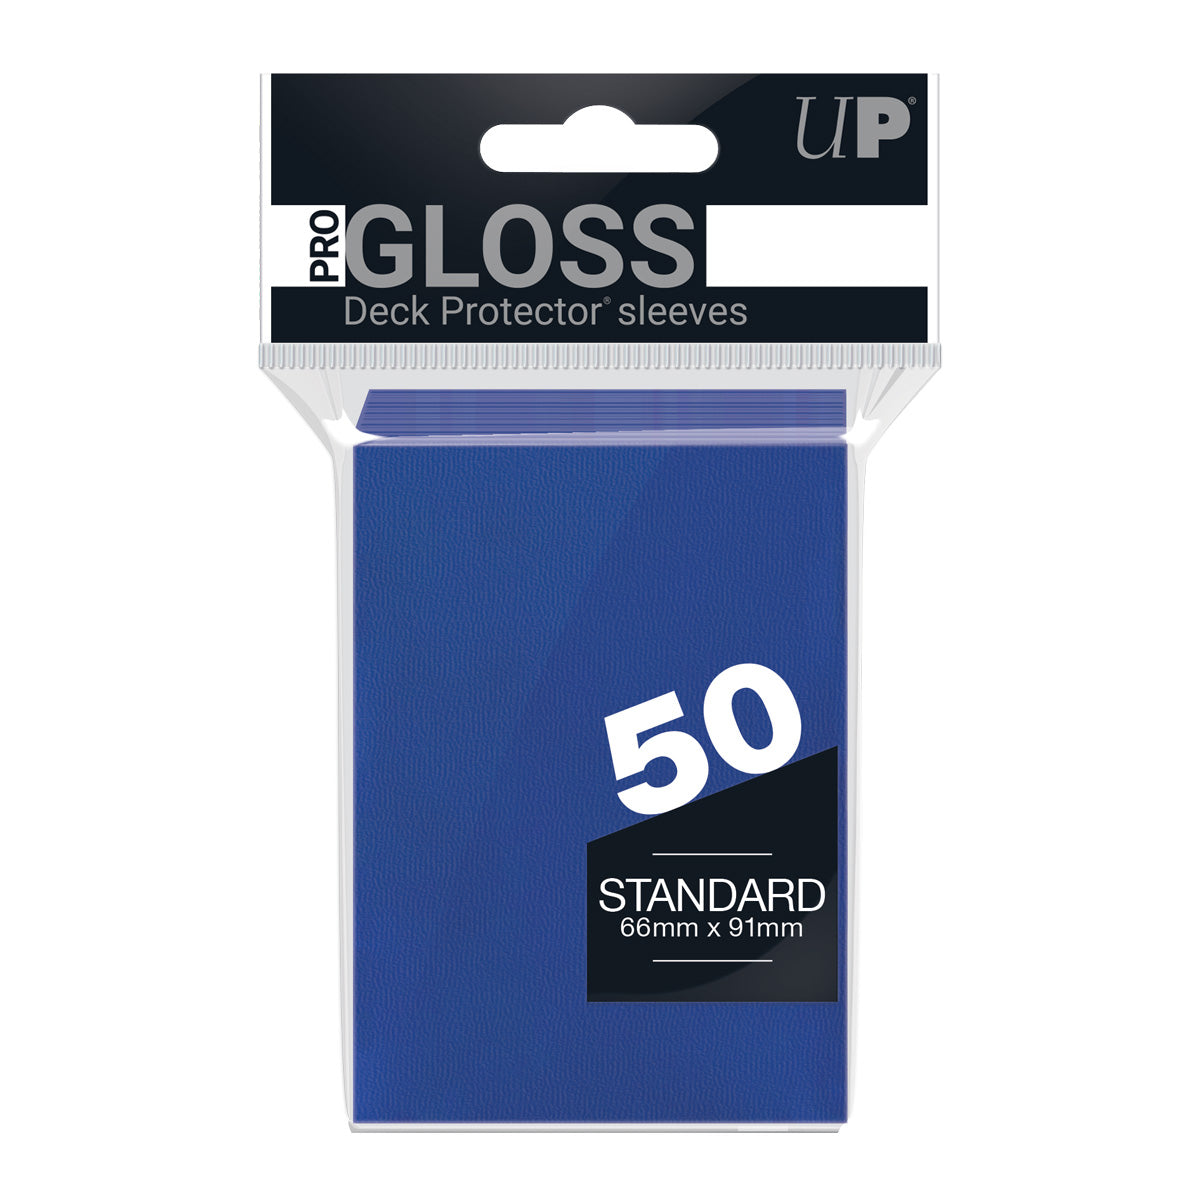 PRO GLOSS DECK PROTECTOR SLEEVES ULTRA PRO BLUE STANDARD